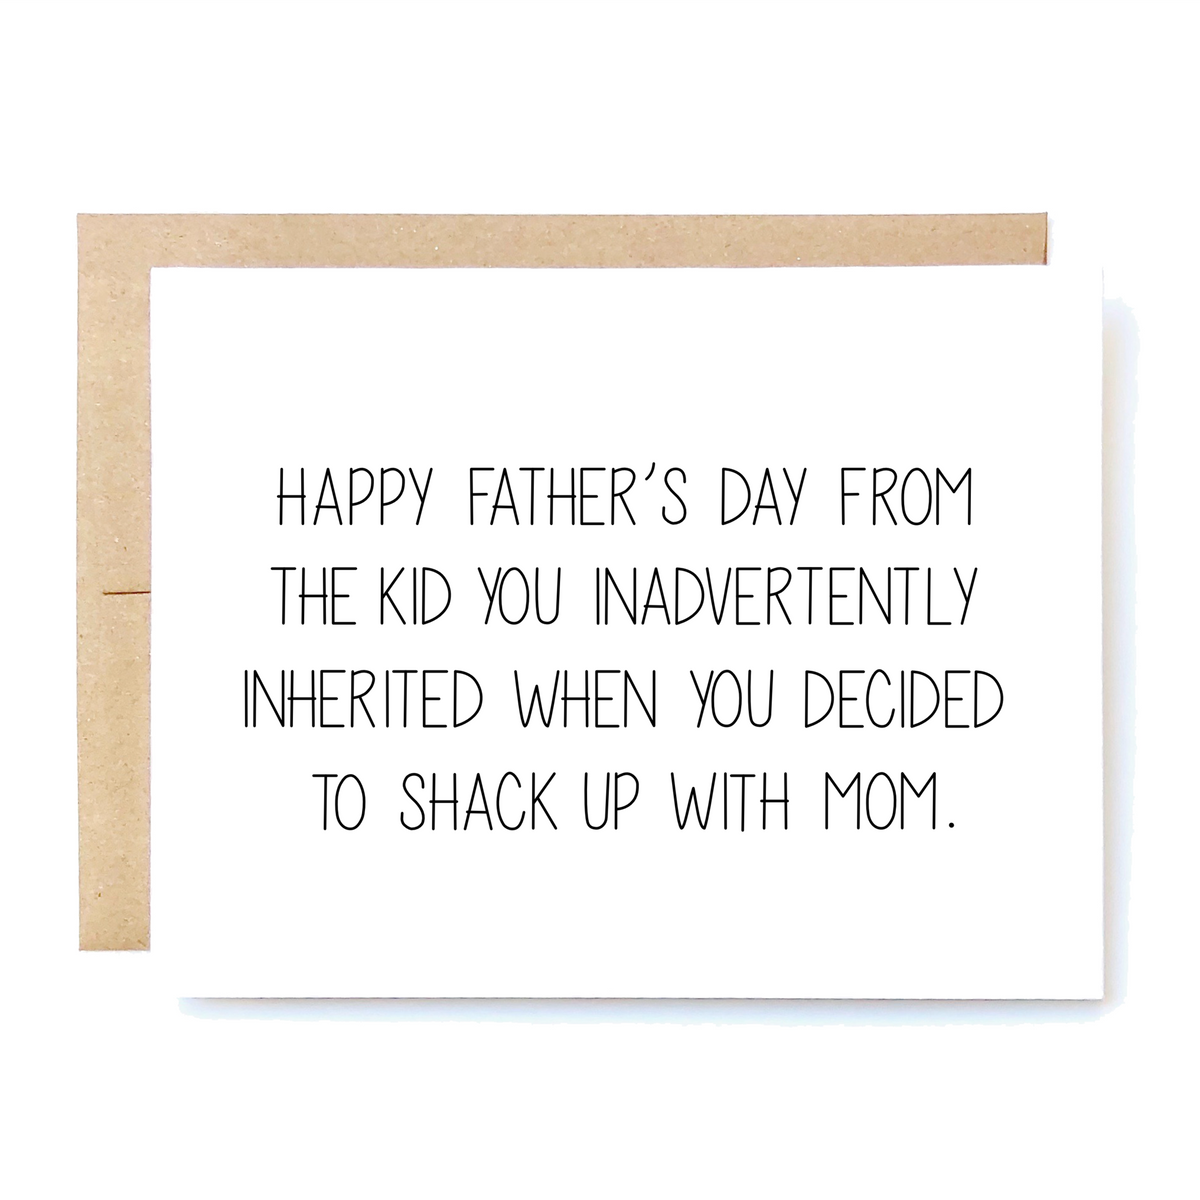 Funny Stepdad Father's Day Card